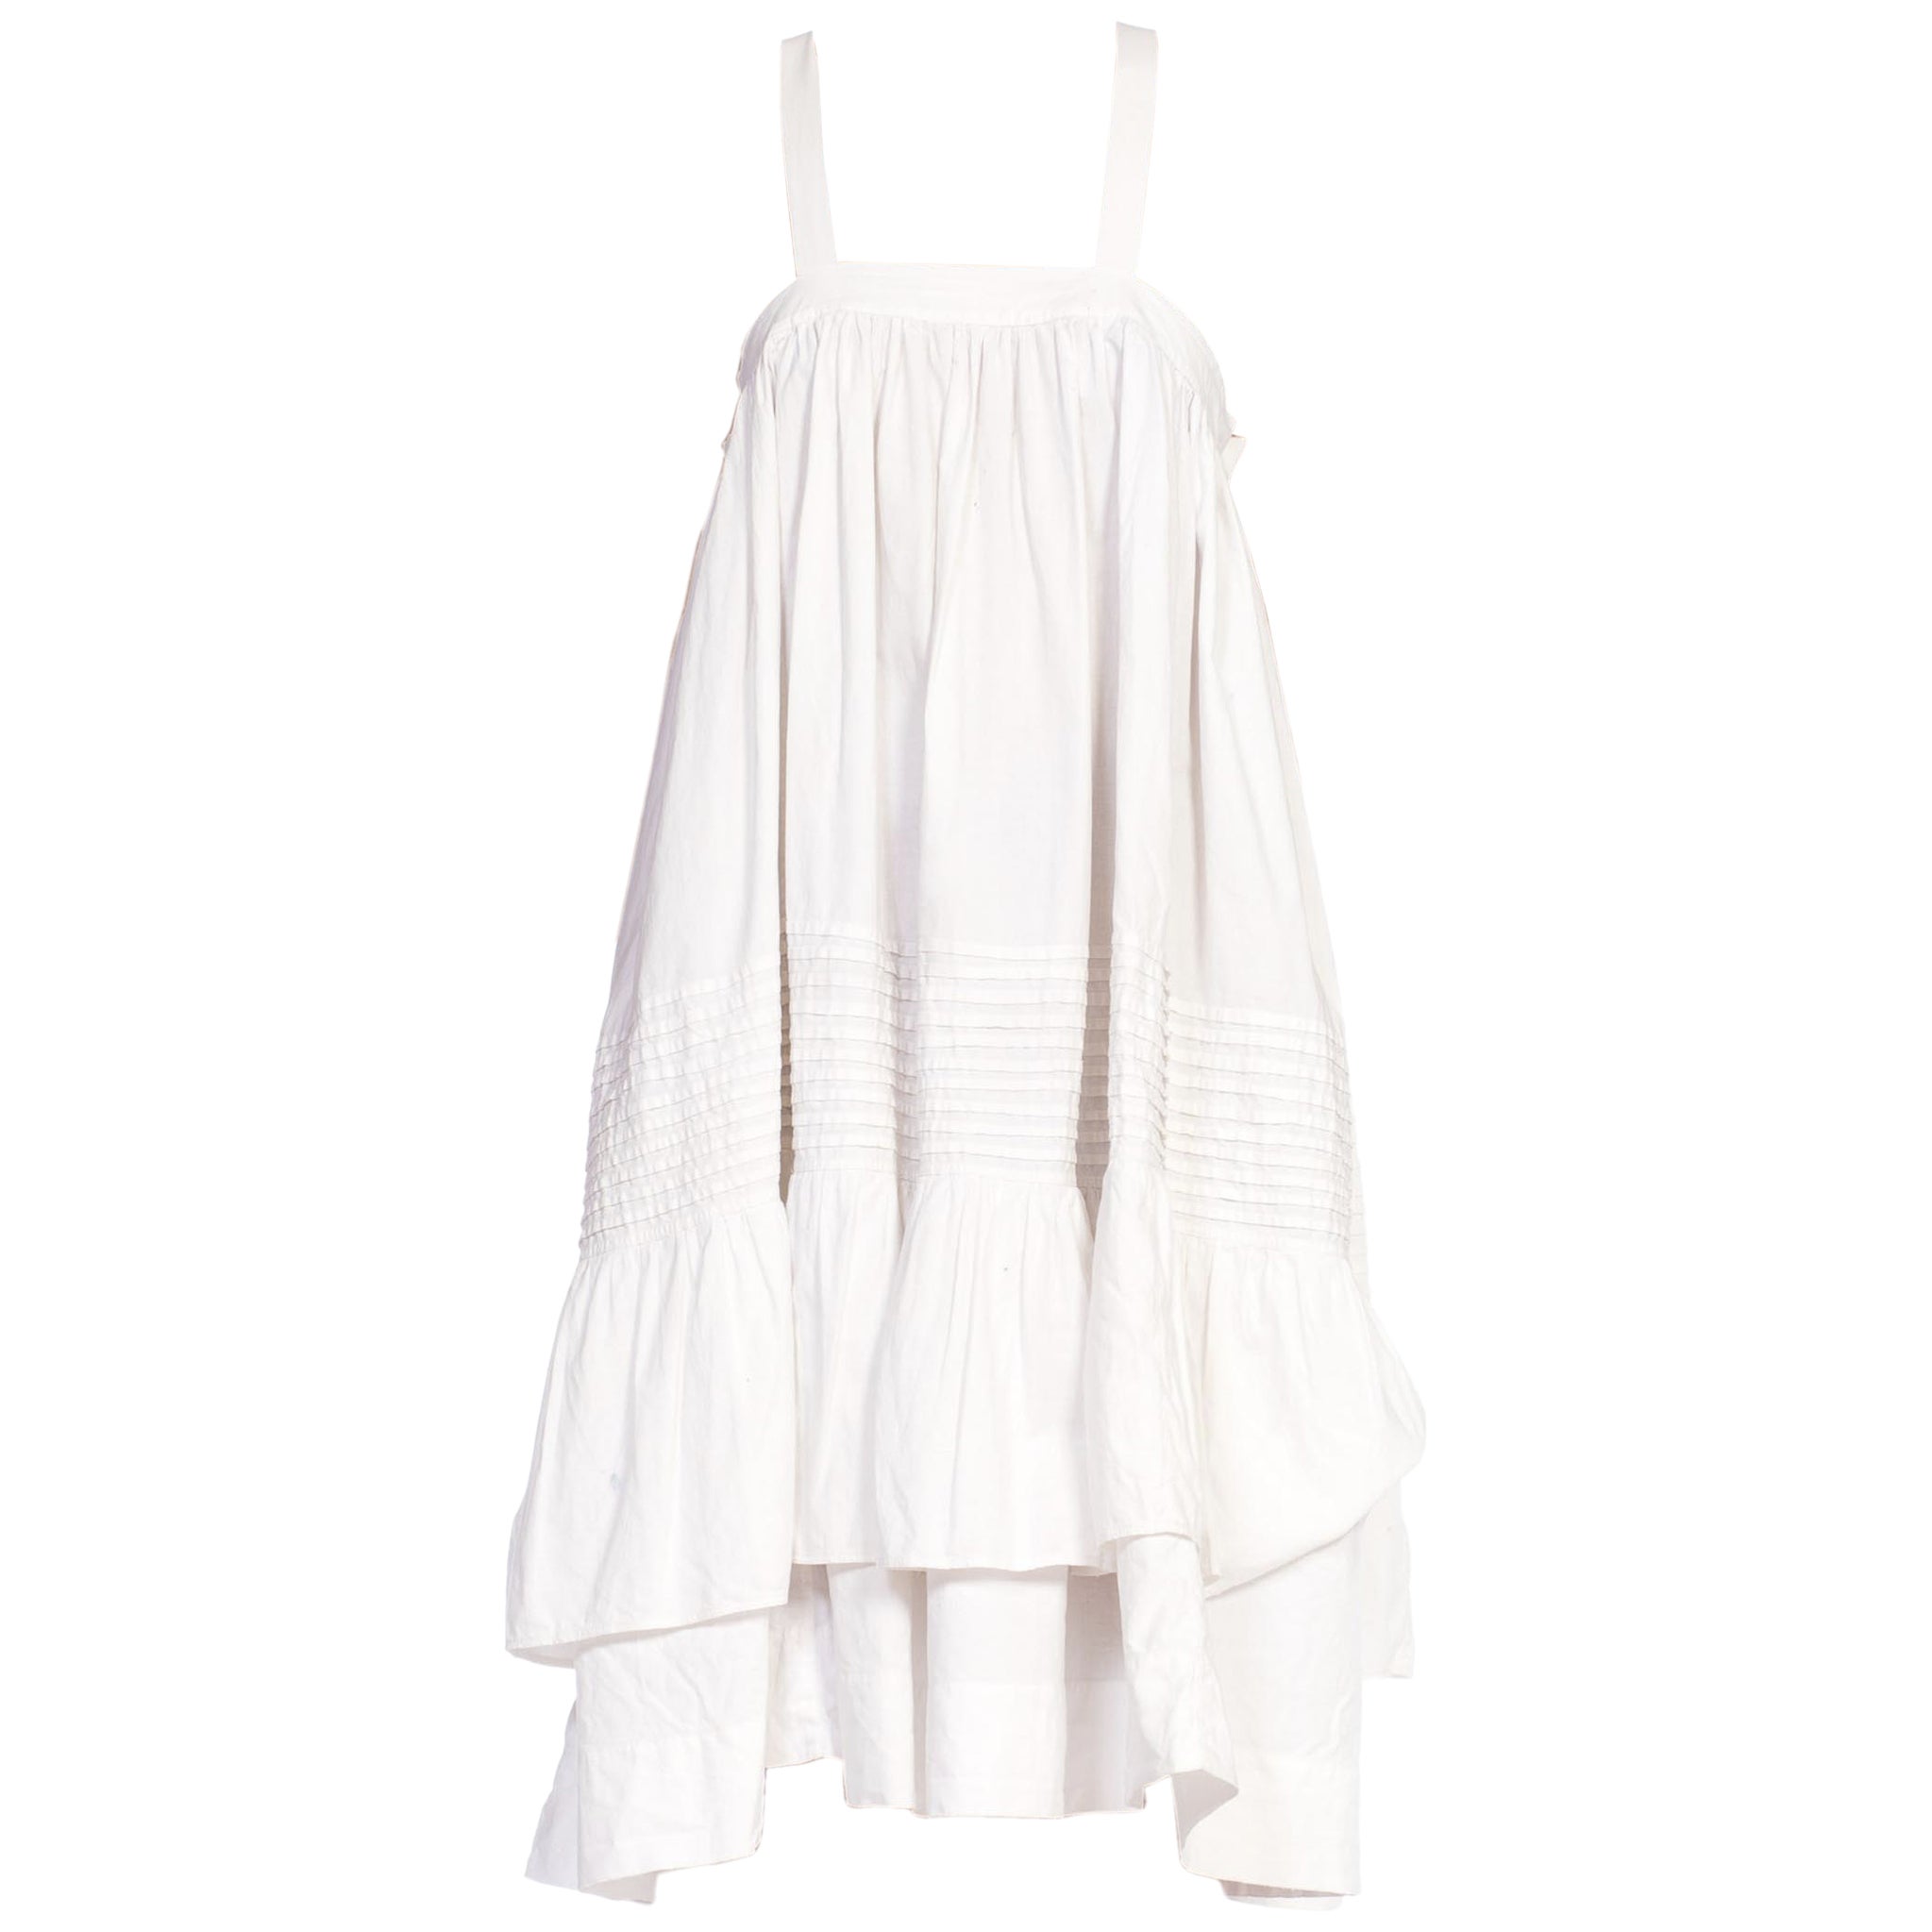 MORPHEW COLLECTION White Organic Cotton Eyelet Lace Maxi Dress Made ...